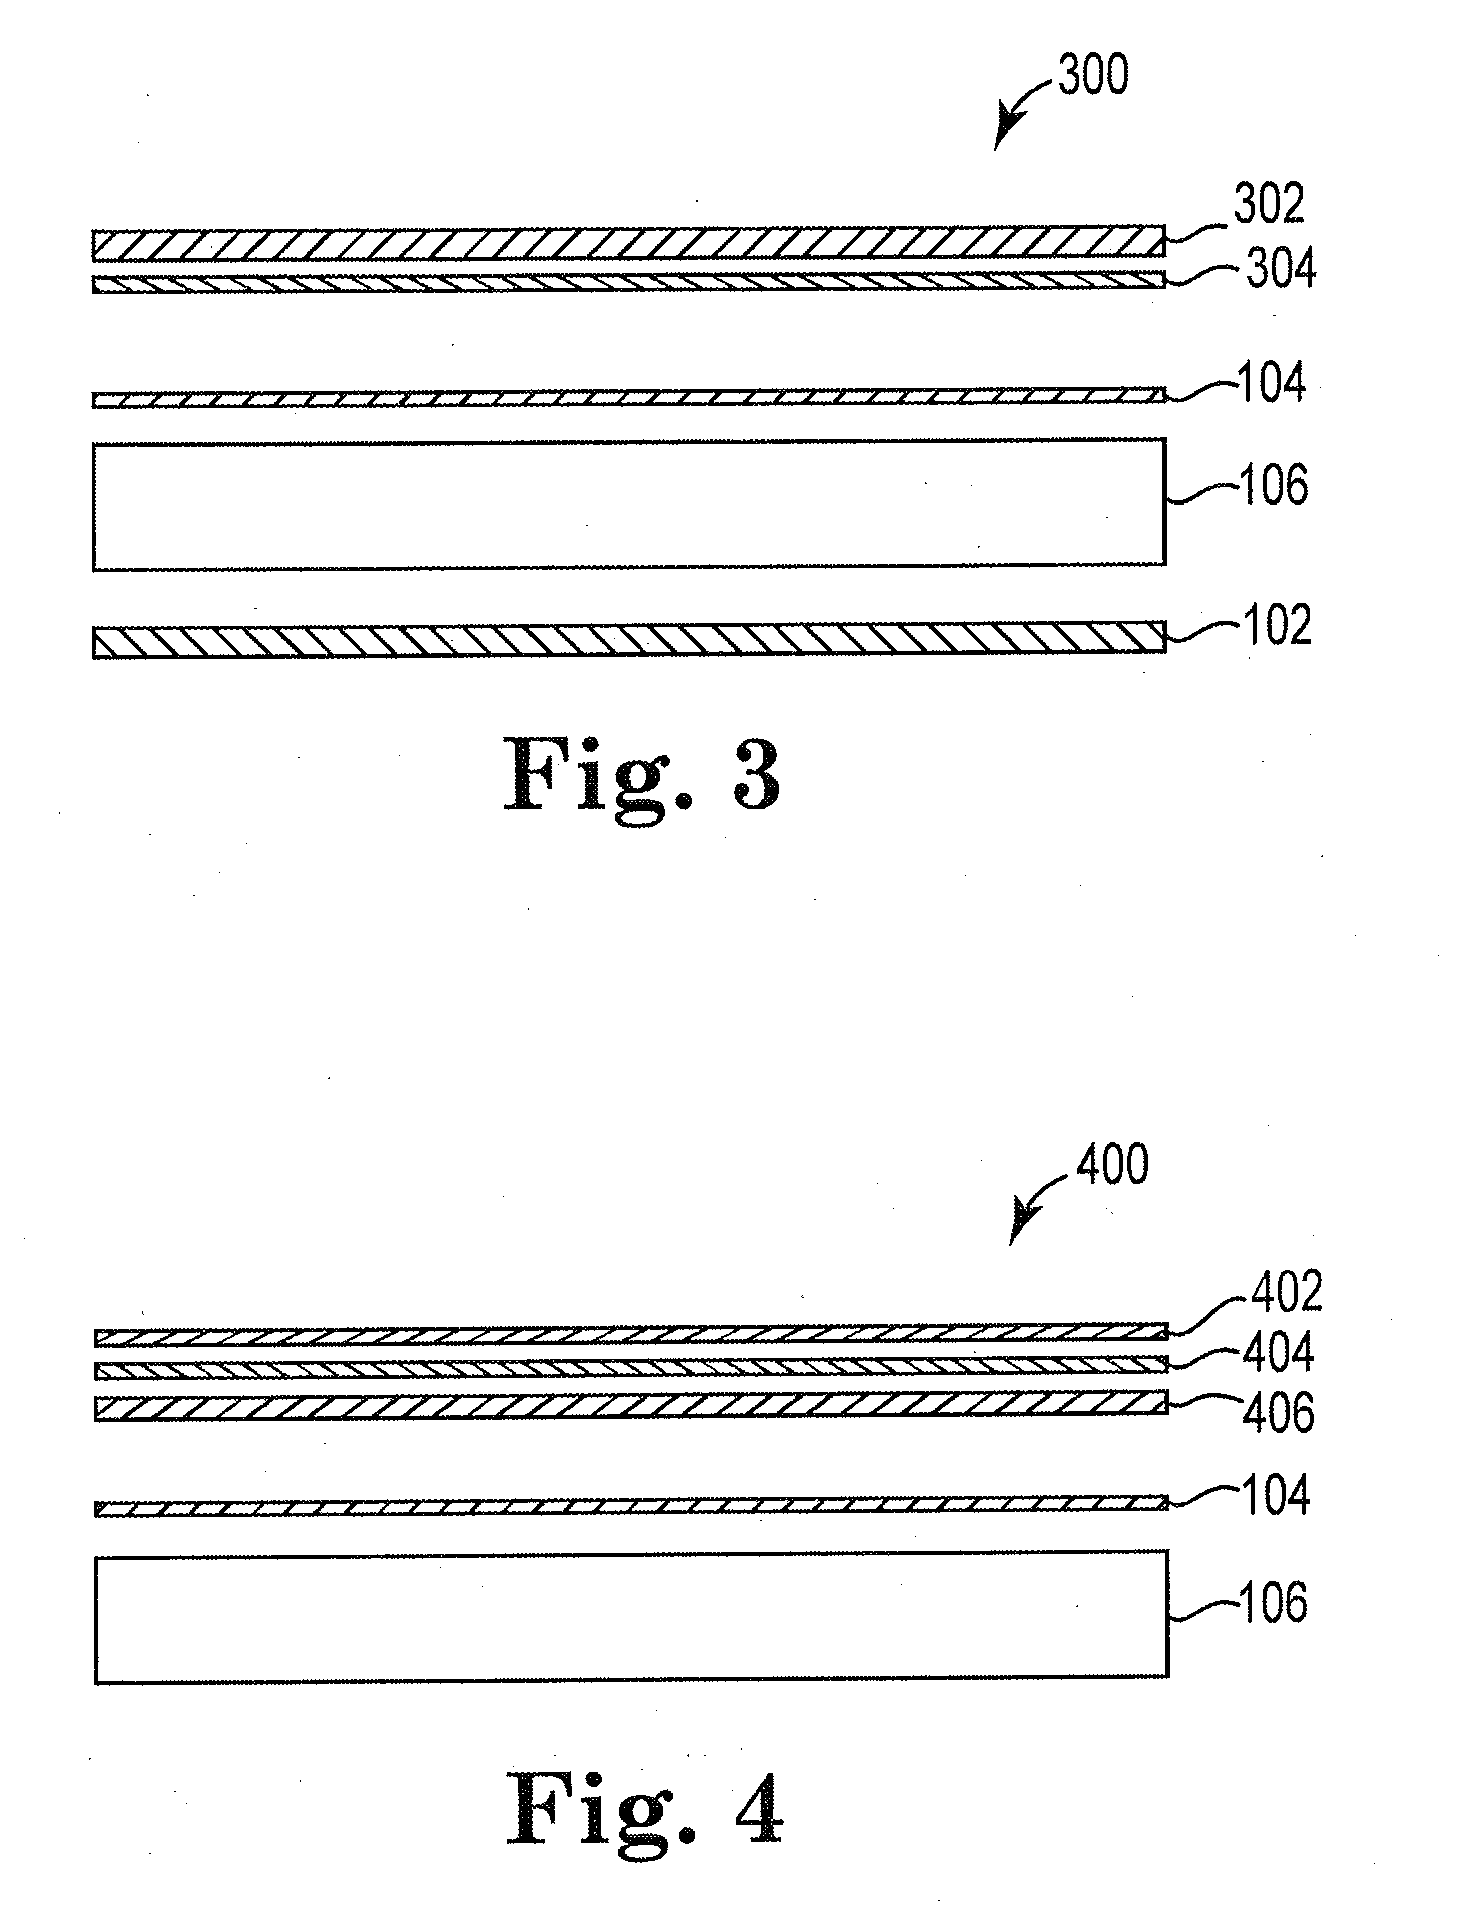 Biolaminate composite assembly and related method